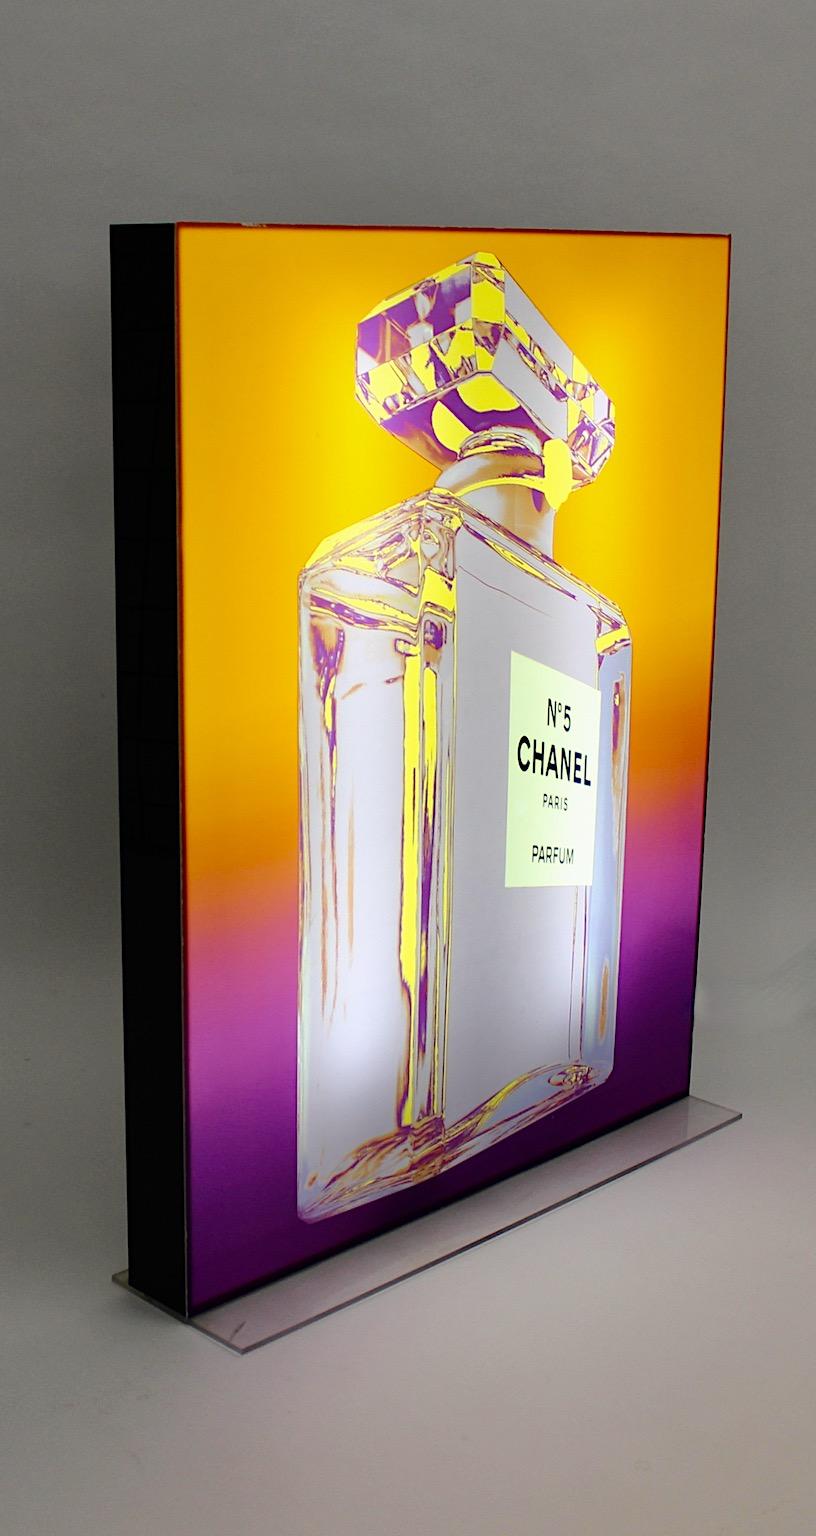 French Pop Art Chanel No. 5 Vintage Advertising Lighting Display after Andy Warhol 1999 For Sale